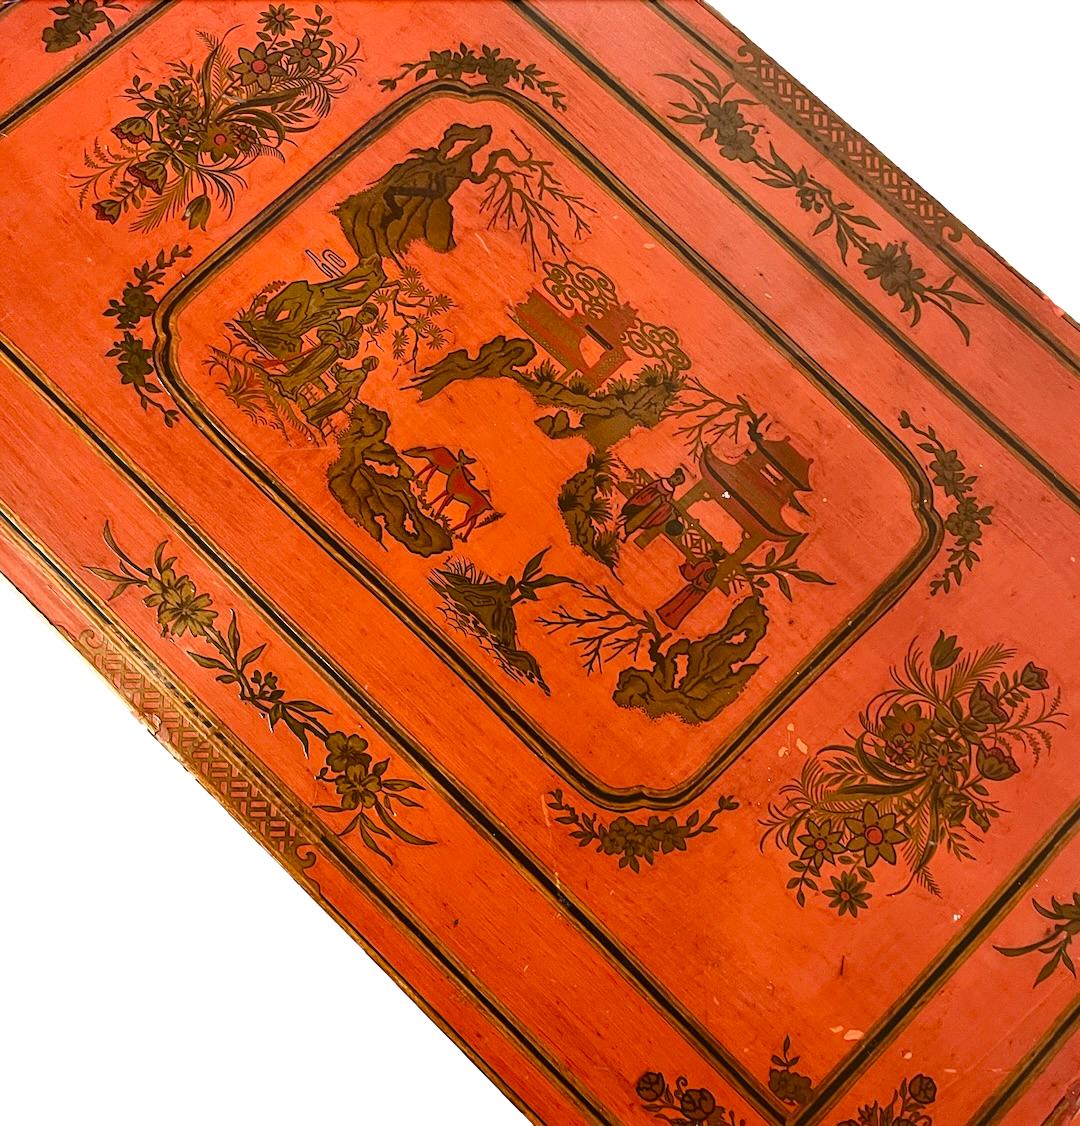 Red-Painted Chinoiserie Side Table on Wheels